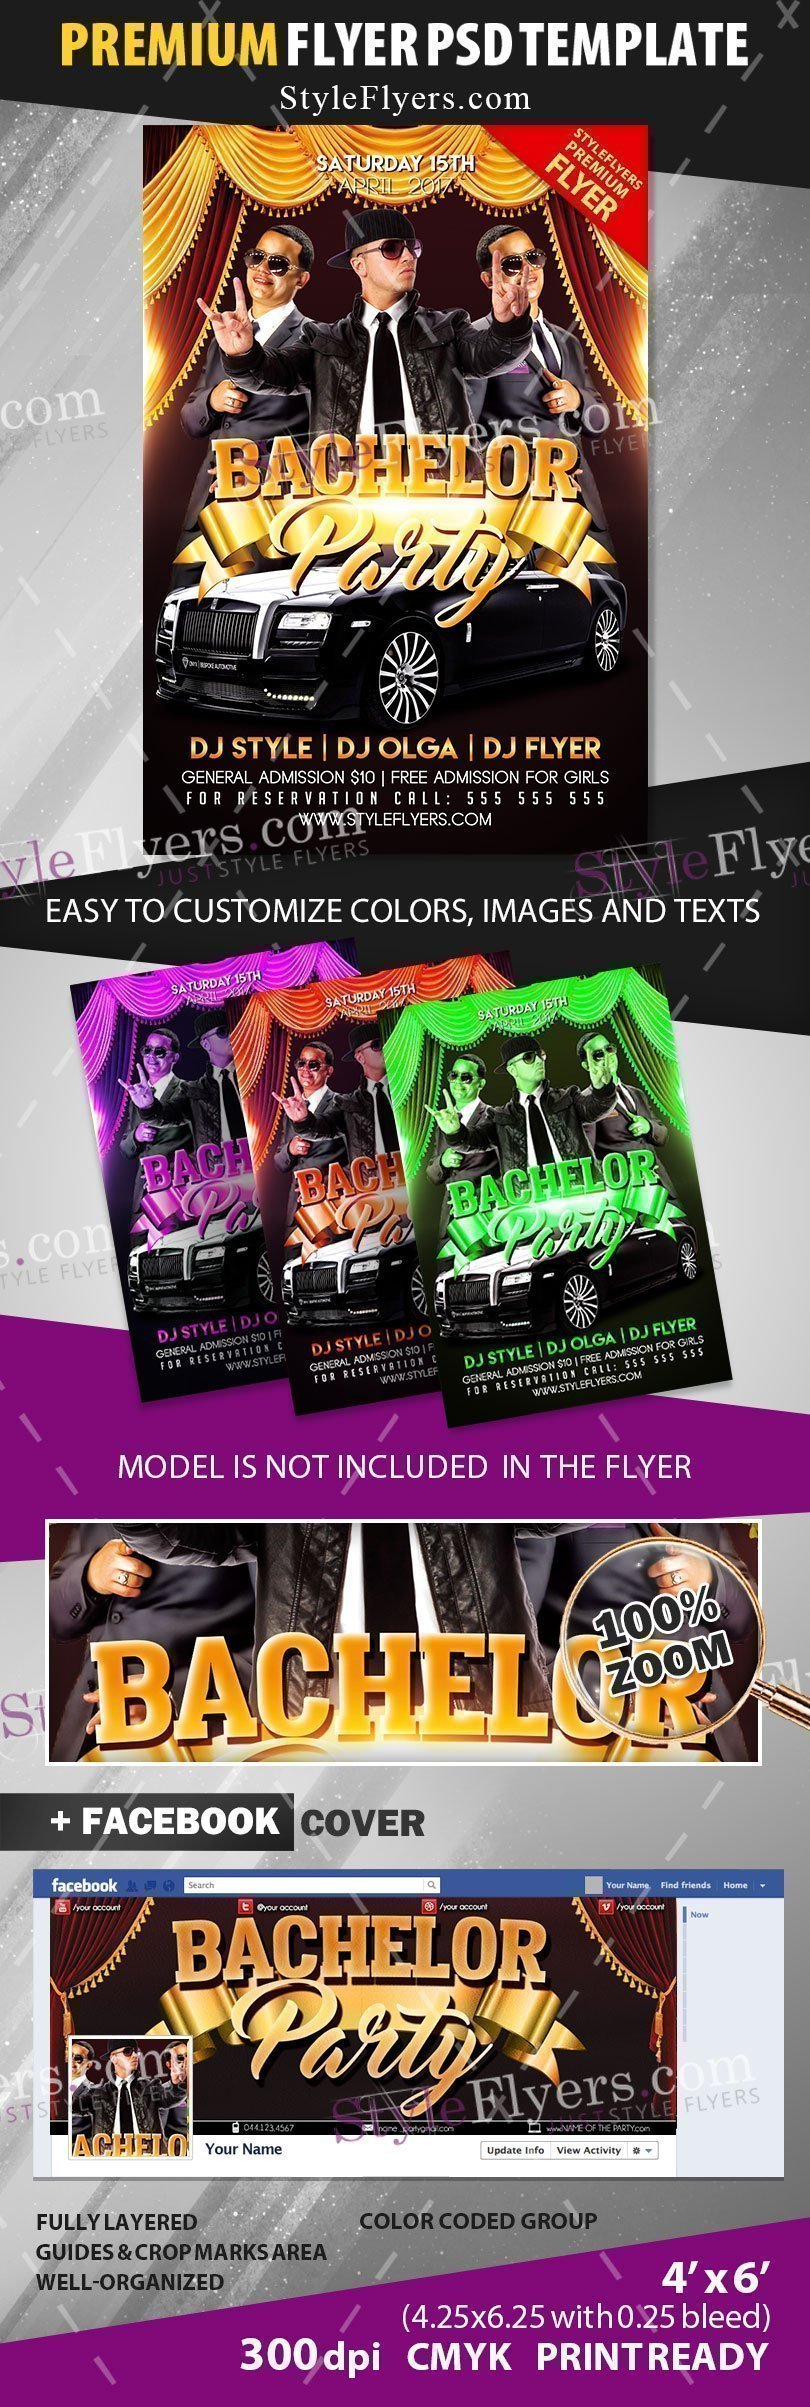 preview_Bachelor_party_Flyer_premium_template